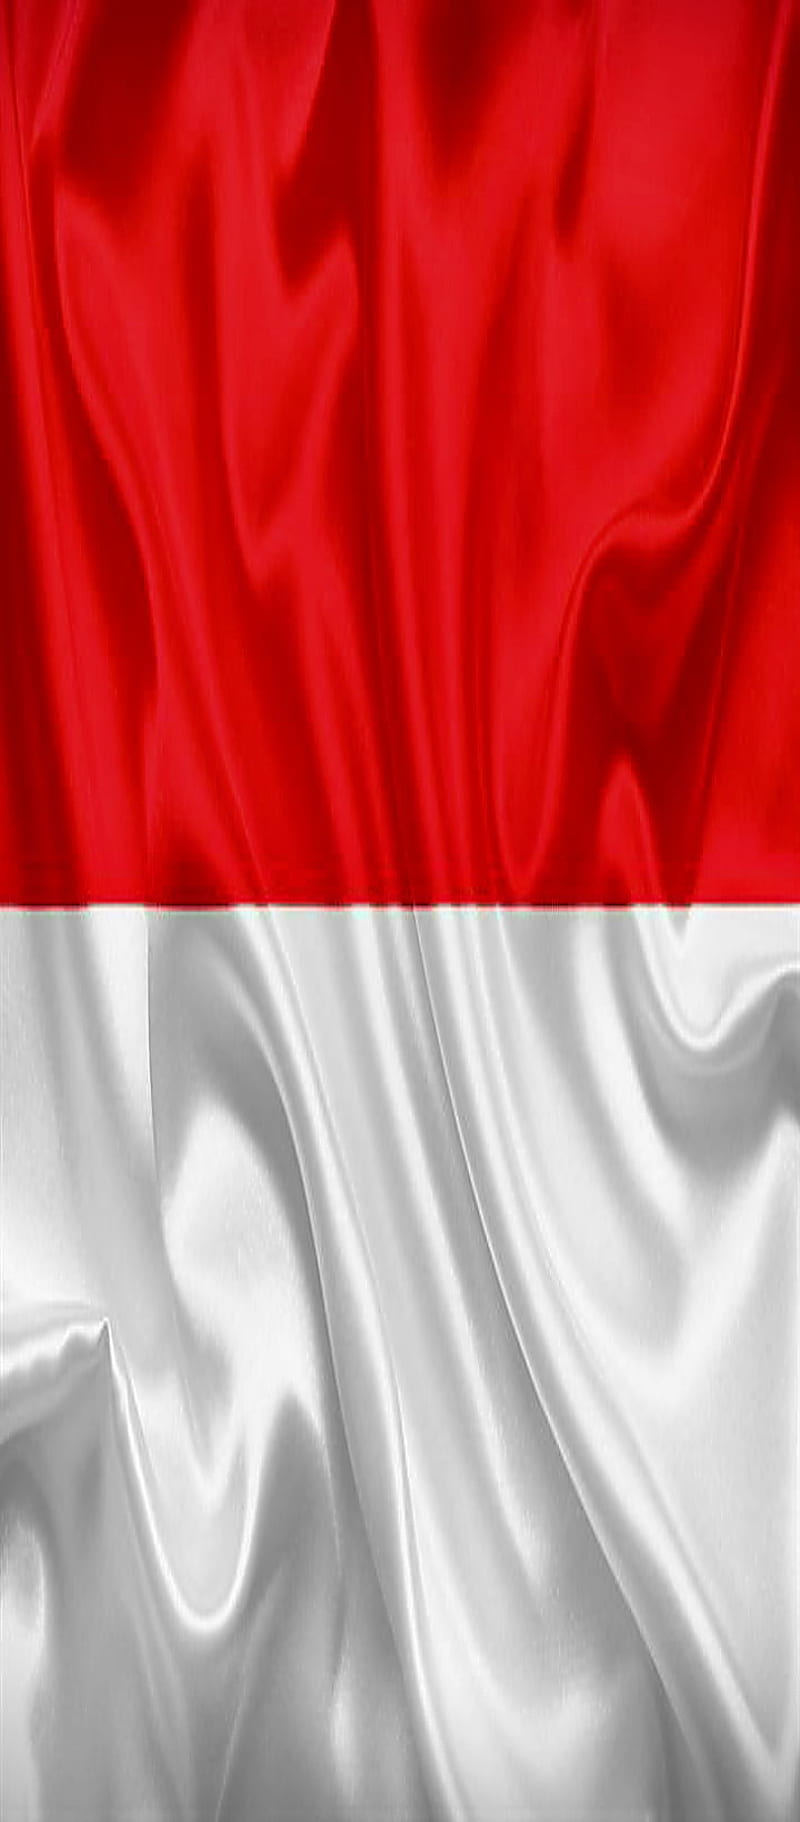 Indonesian, red, flag, HD phone wallpaper